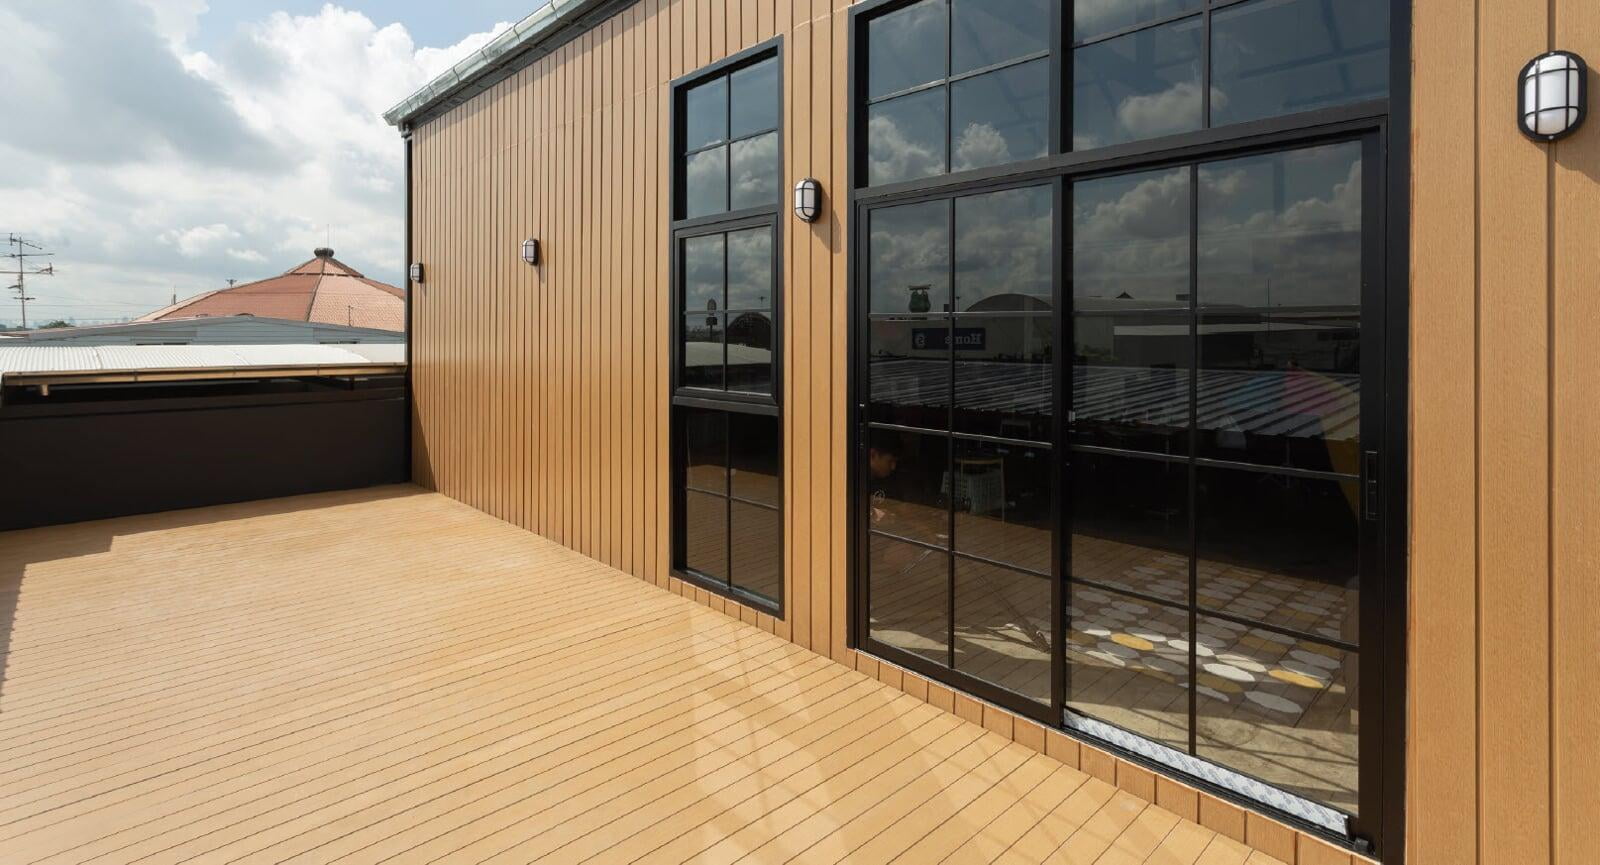 SHERA fibre cement decking is a fire resistant decking plank